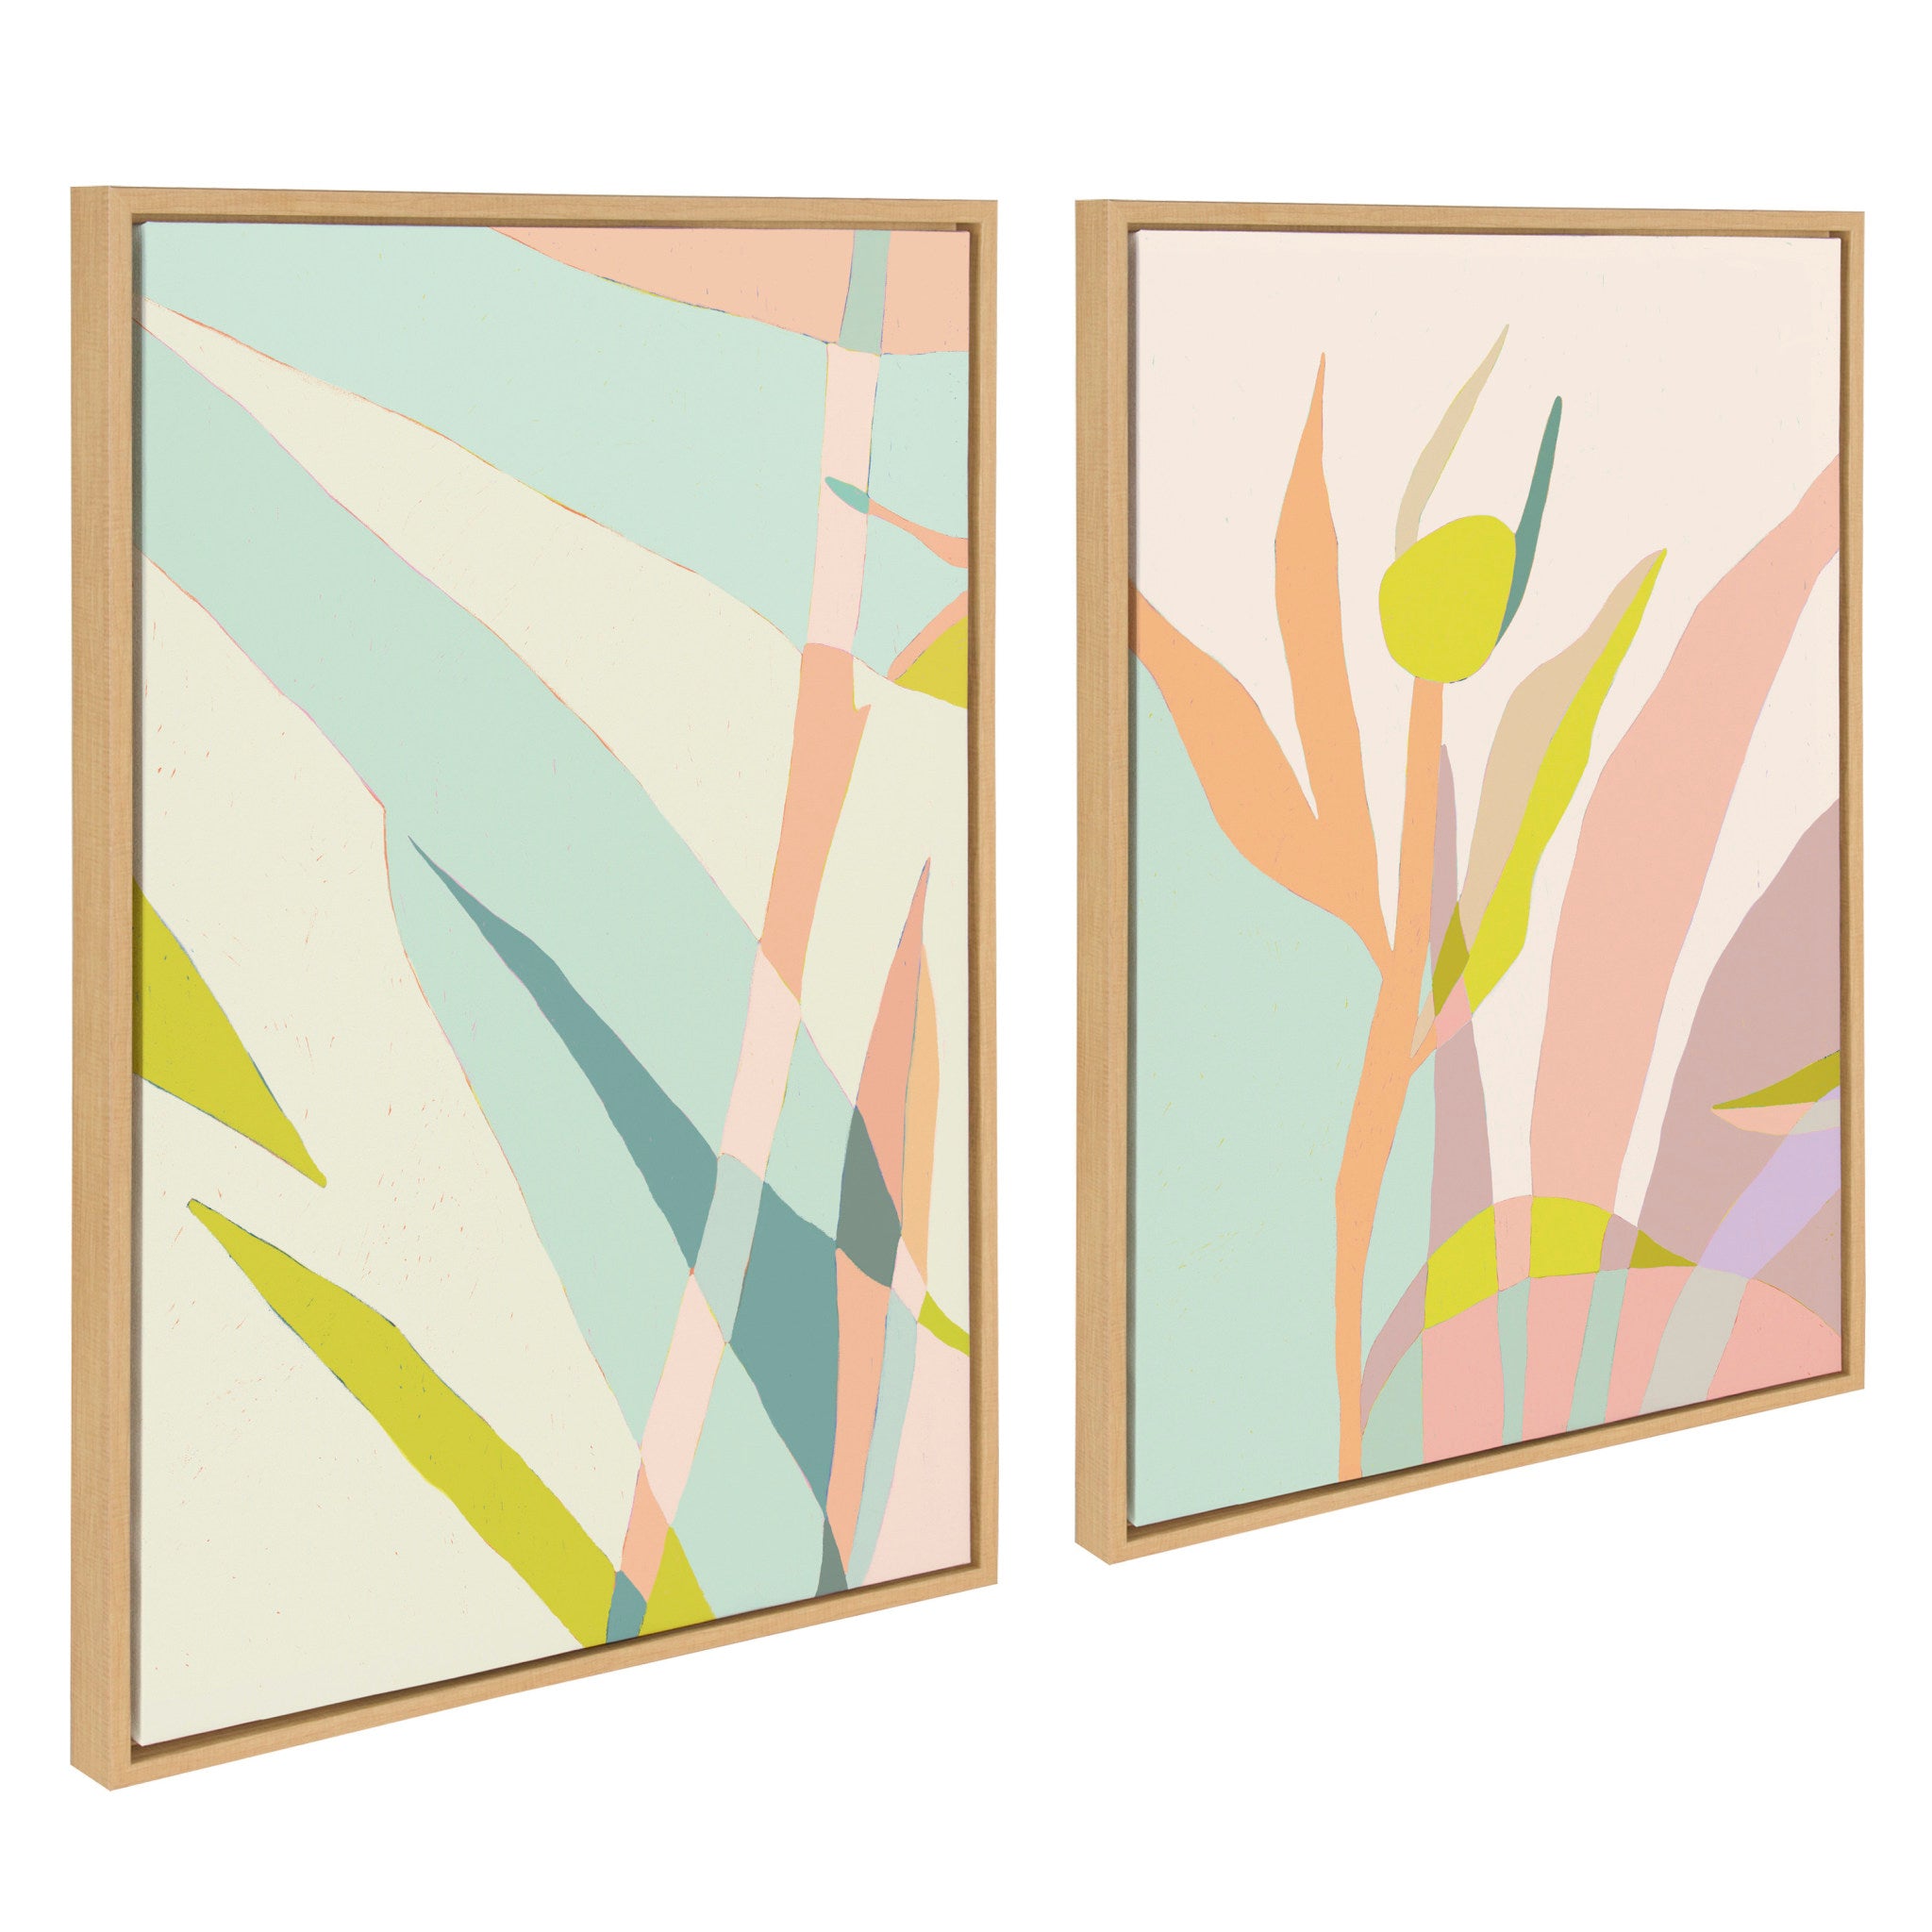 Sylvie Delight in the Moment 3 and 4 Framed Canvas by Alicia Schultz